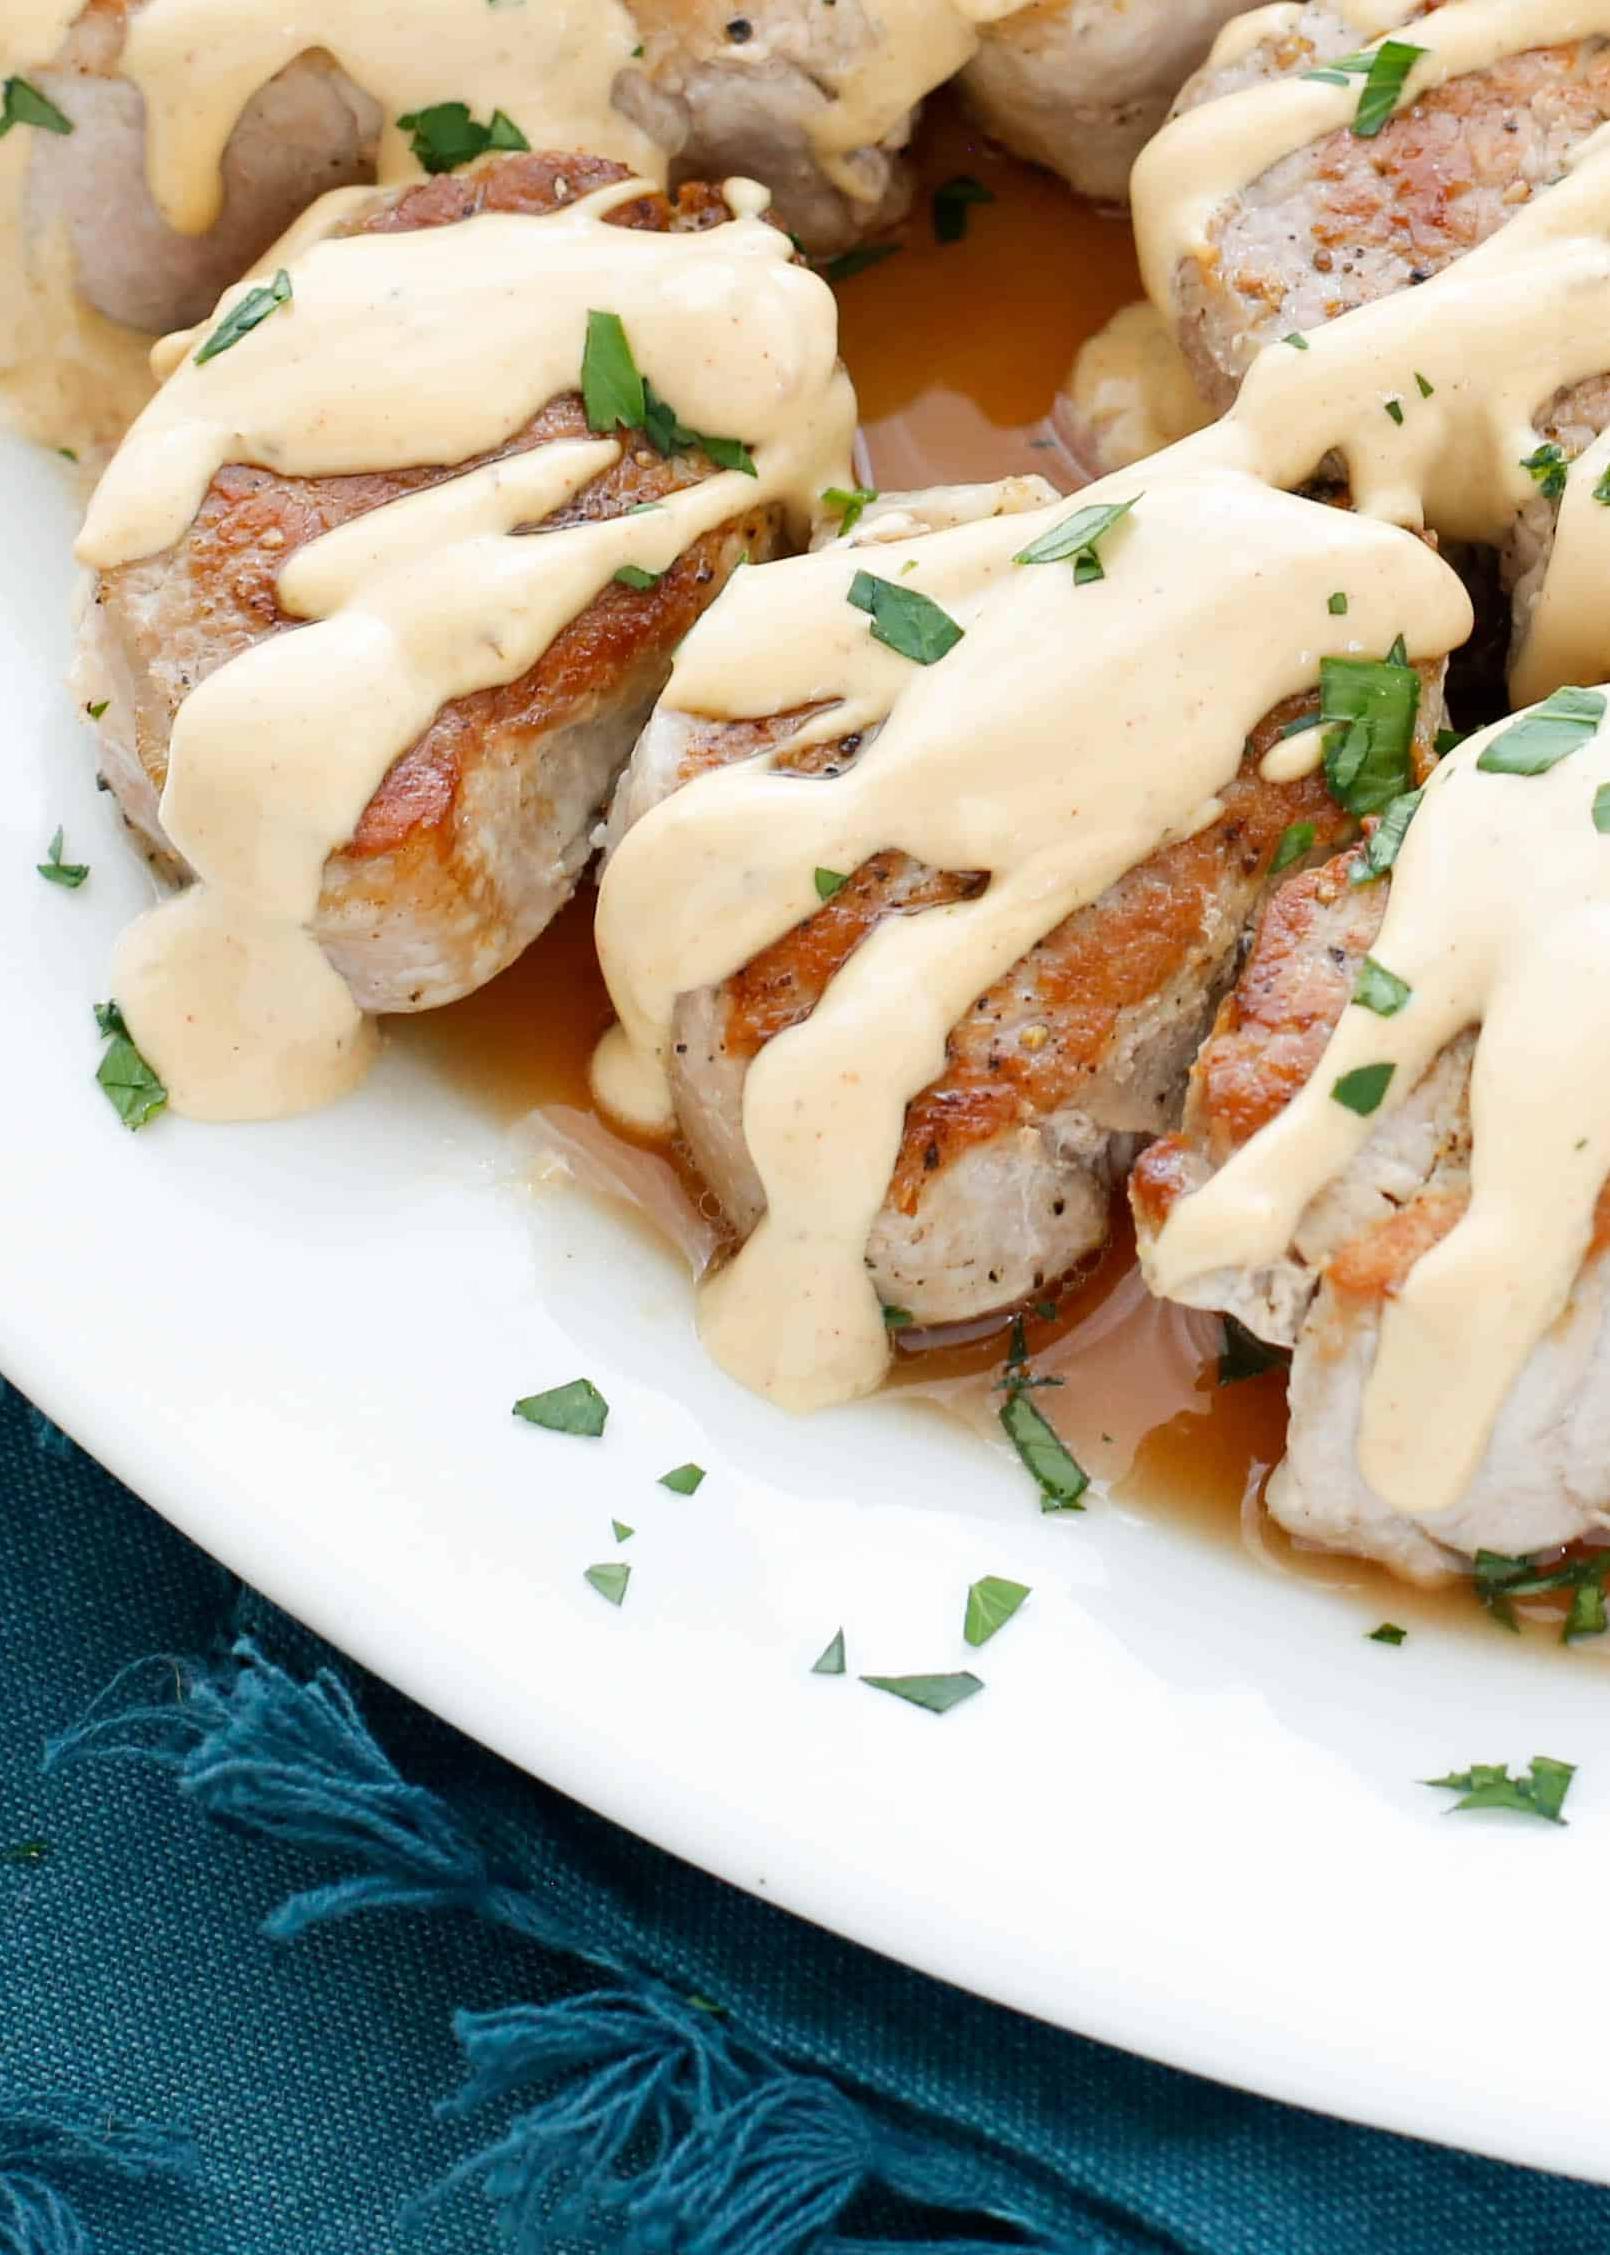  This pork medallions in wine sauce is a real showstopper.